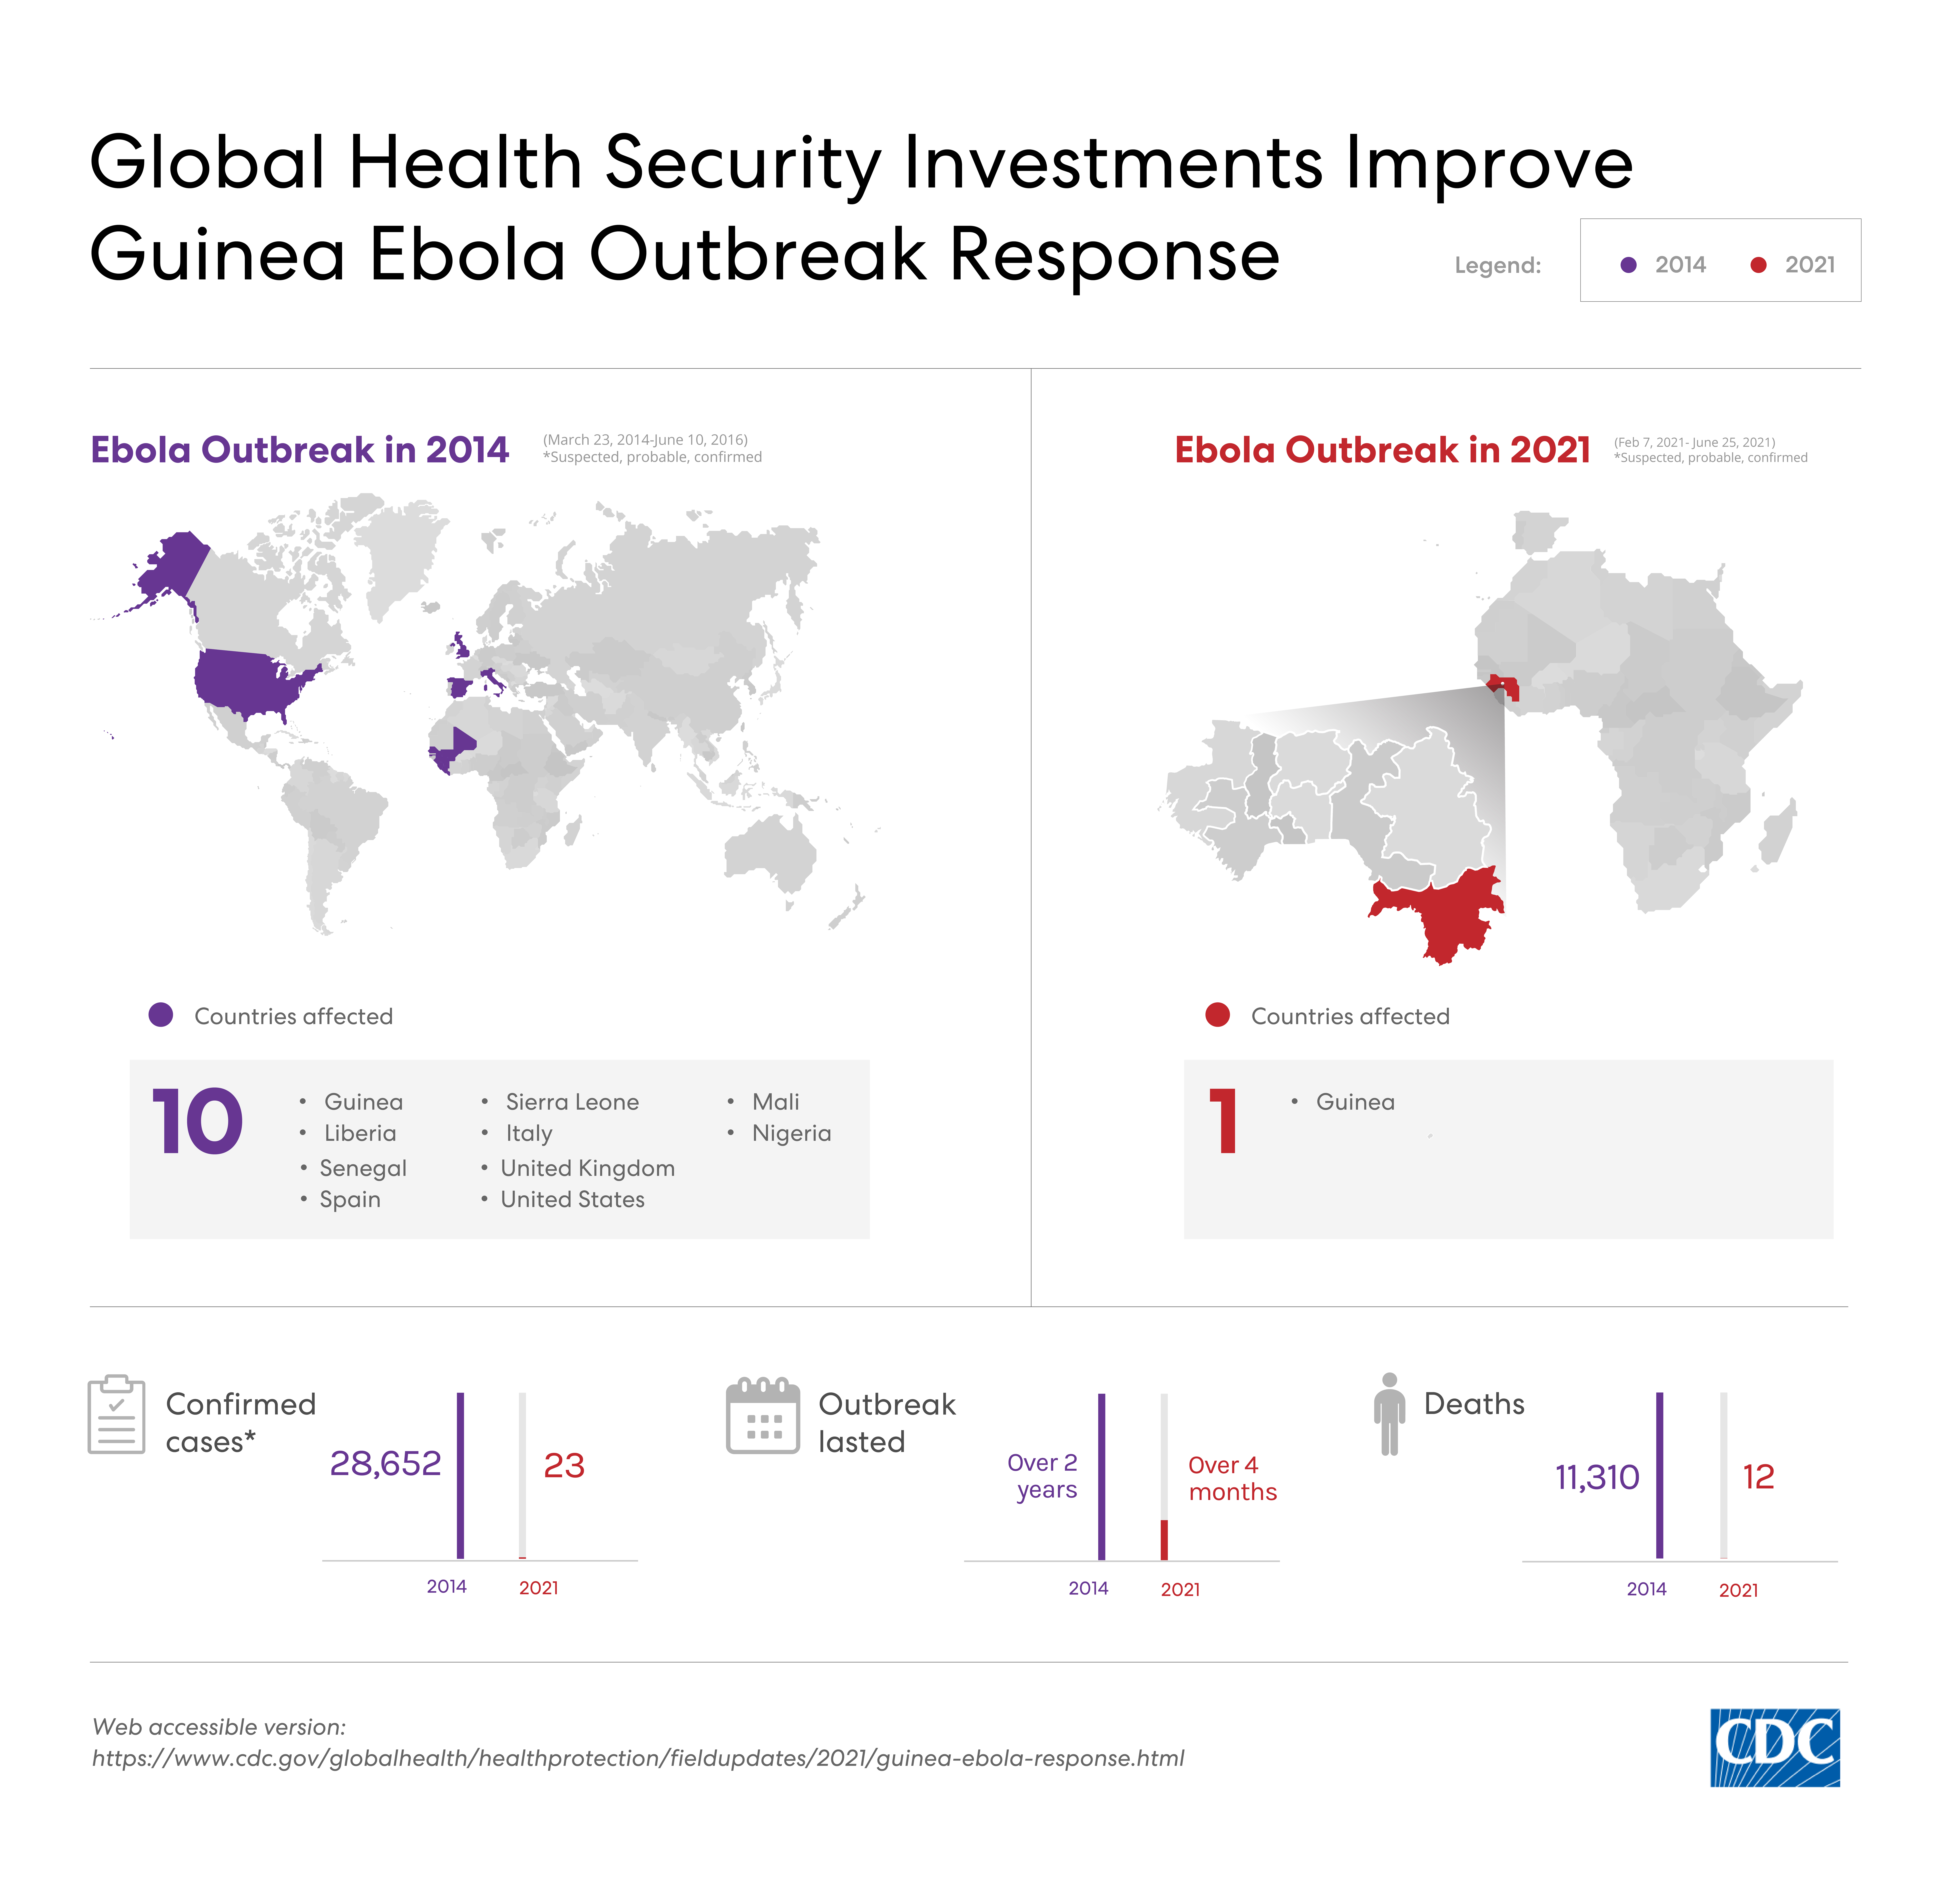 Global Health Security Investments Improve Guinea Ebola Outbreak Response